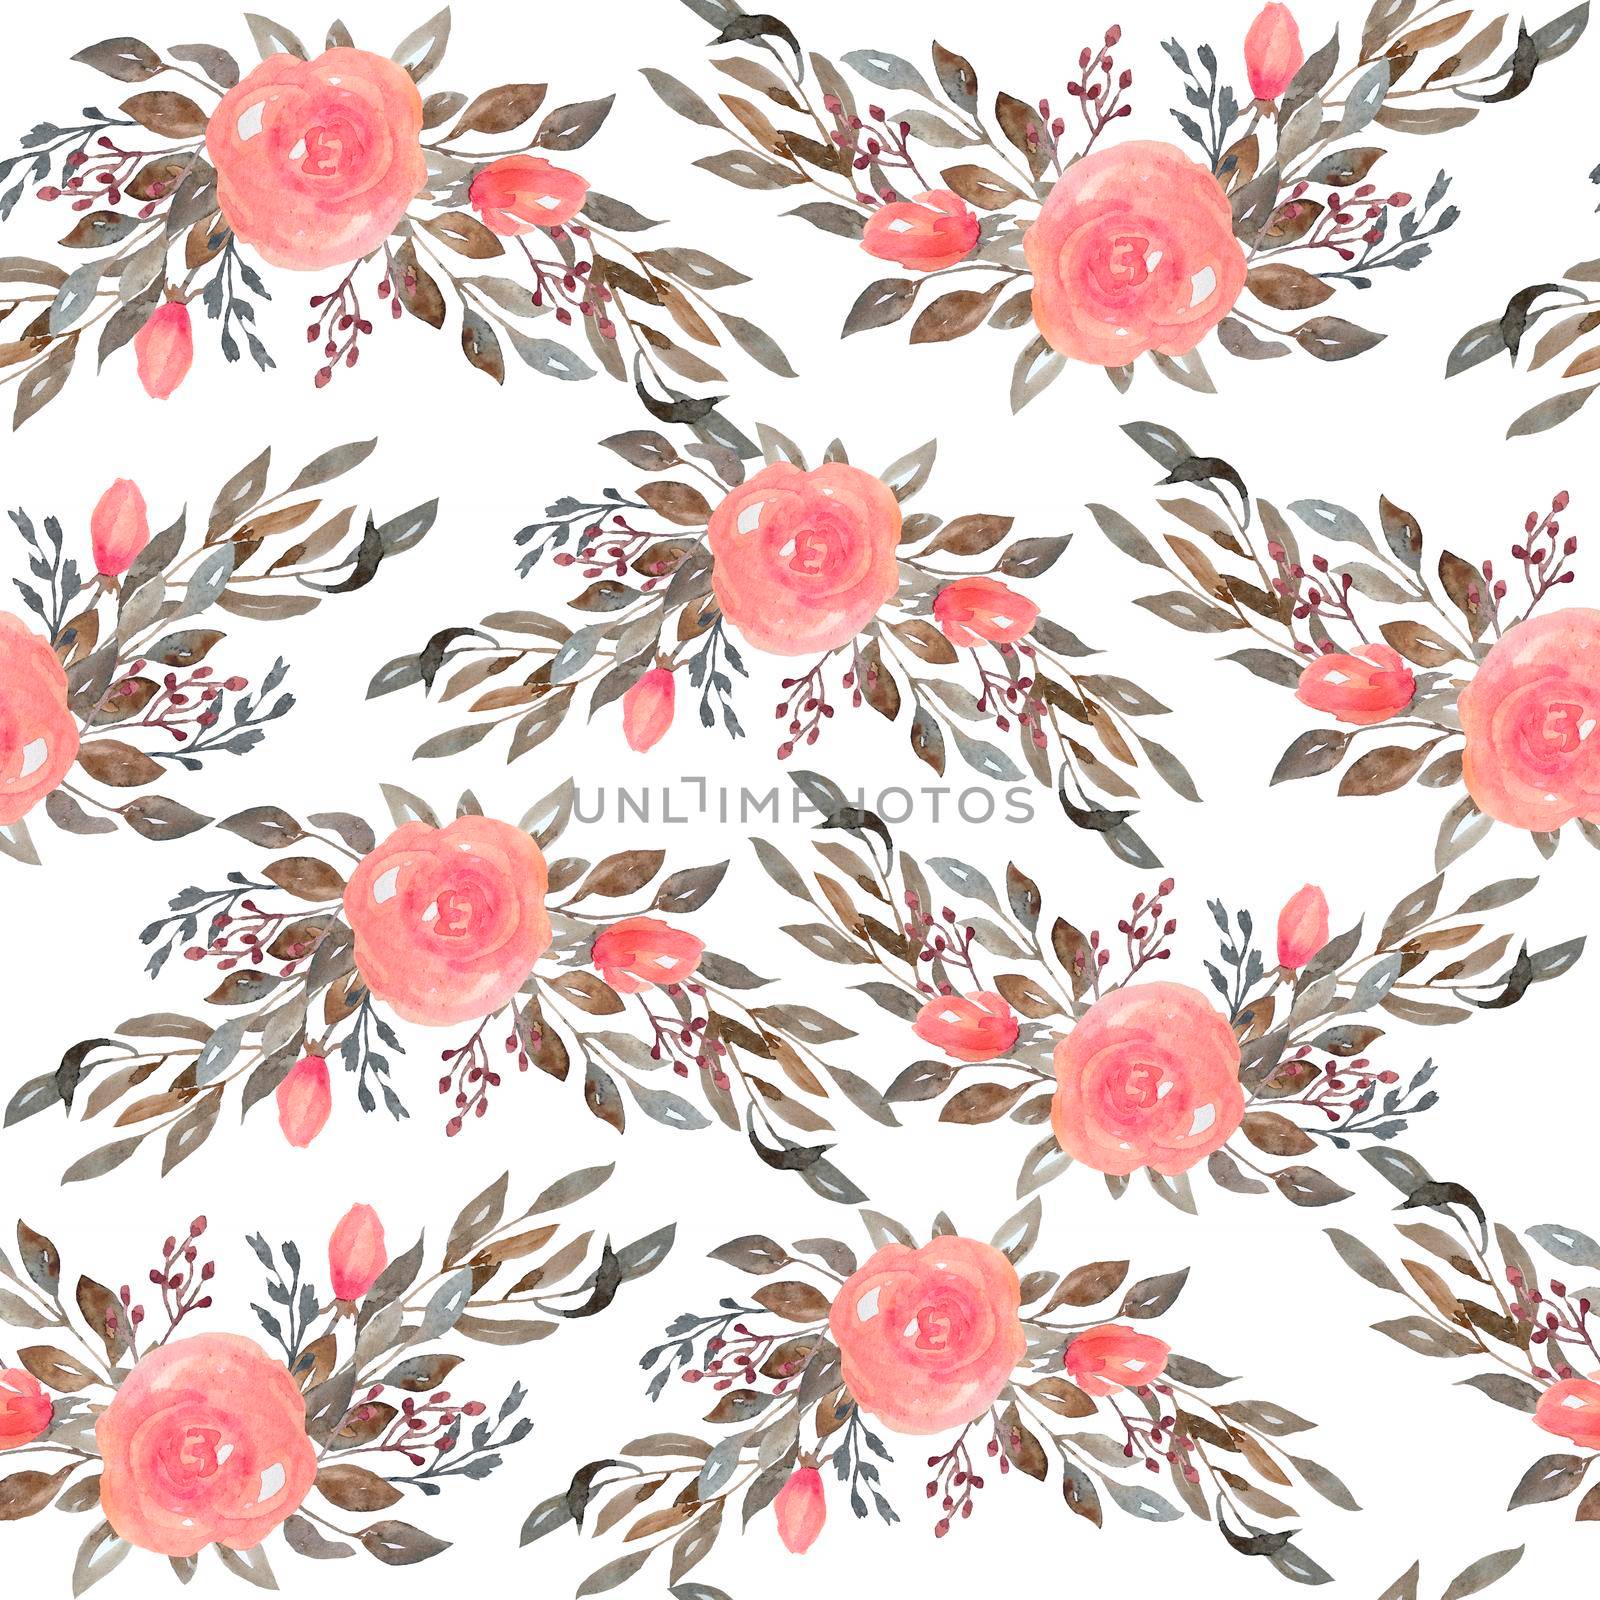 Watercolor seamless pattern of pink blush roses flowers and grey brown neutral faded leaves. Bouquets, petals blossom. Elegant garden blooms for textile wedding invitation cards wallpaper.